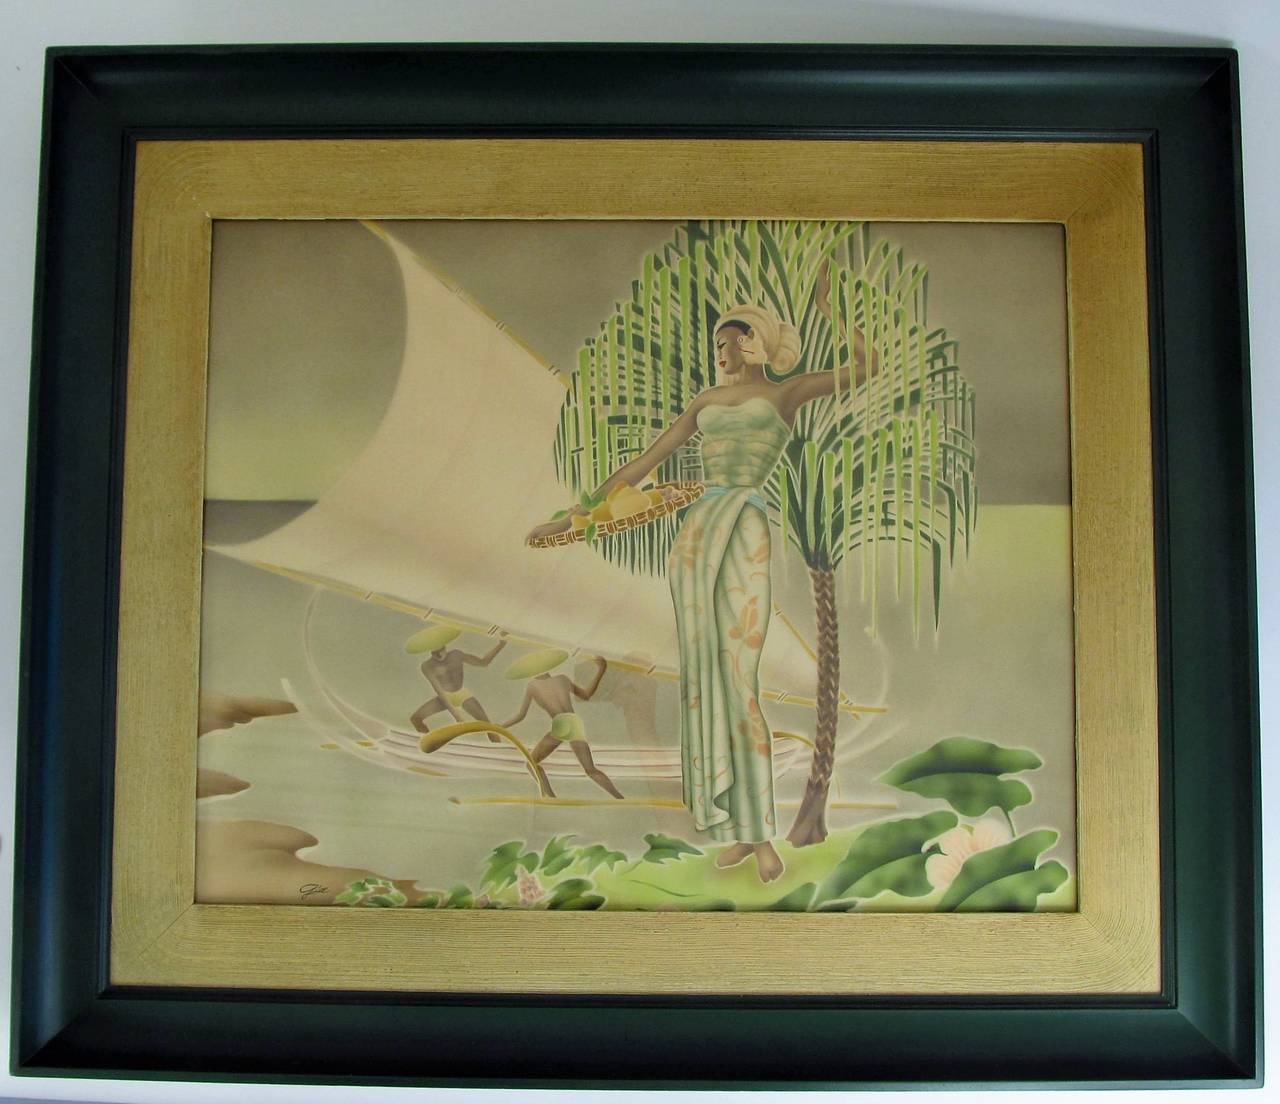 This is a relic of the 1940s and the trend toward the exotic from places like Polynesia and Hawaii. Although little is known about this artist, who only signed his works 